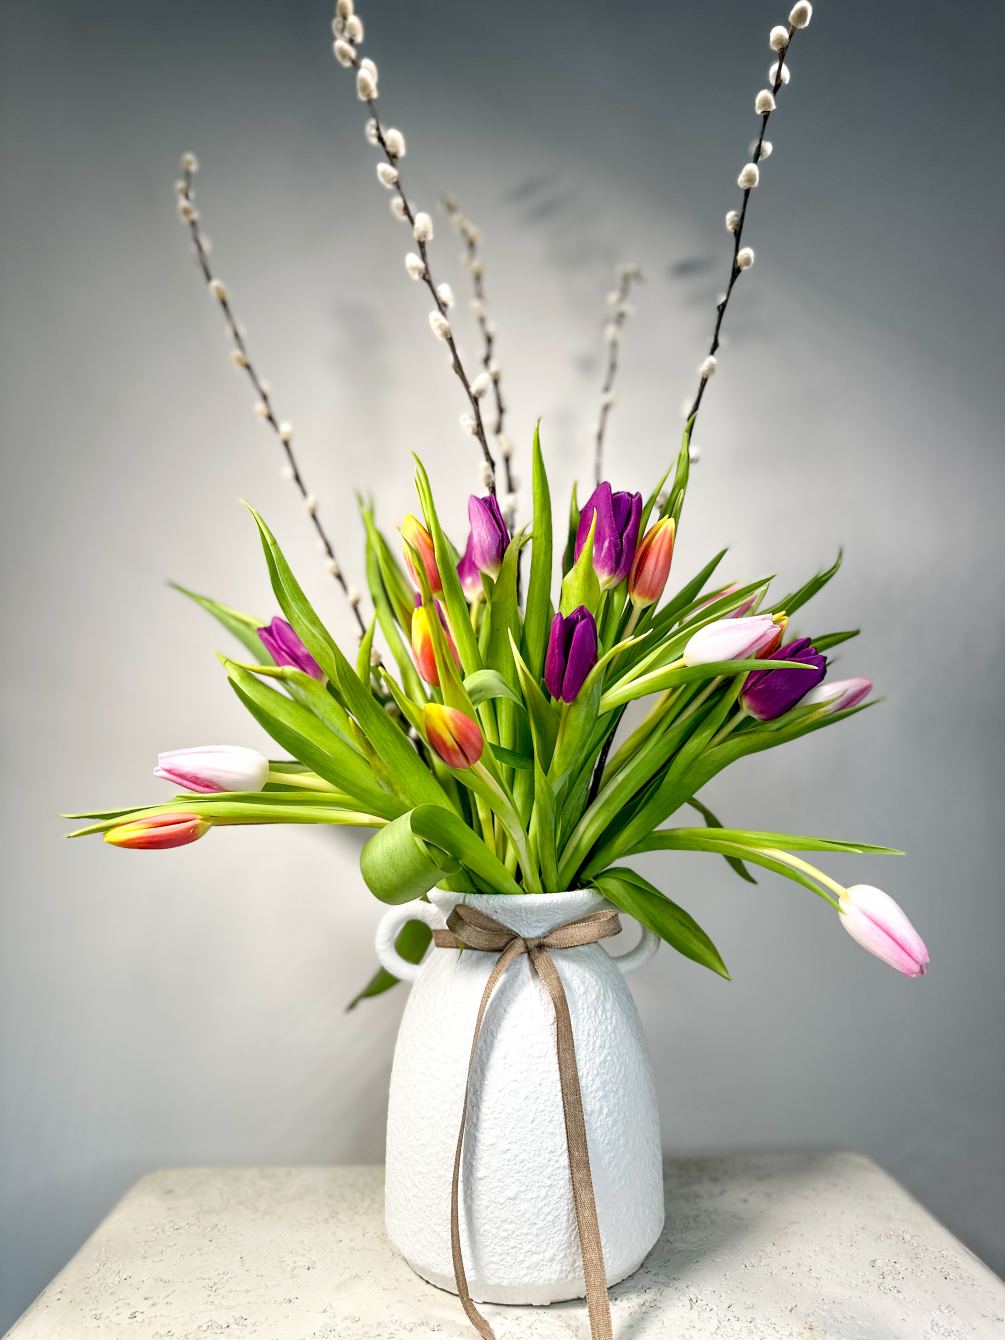 The mix of colorful tulips in a ceramic two-handled jar creates a